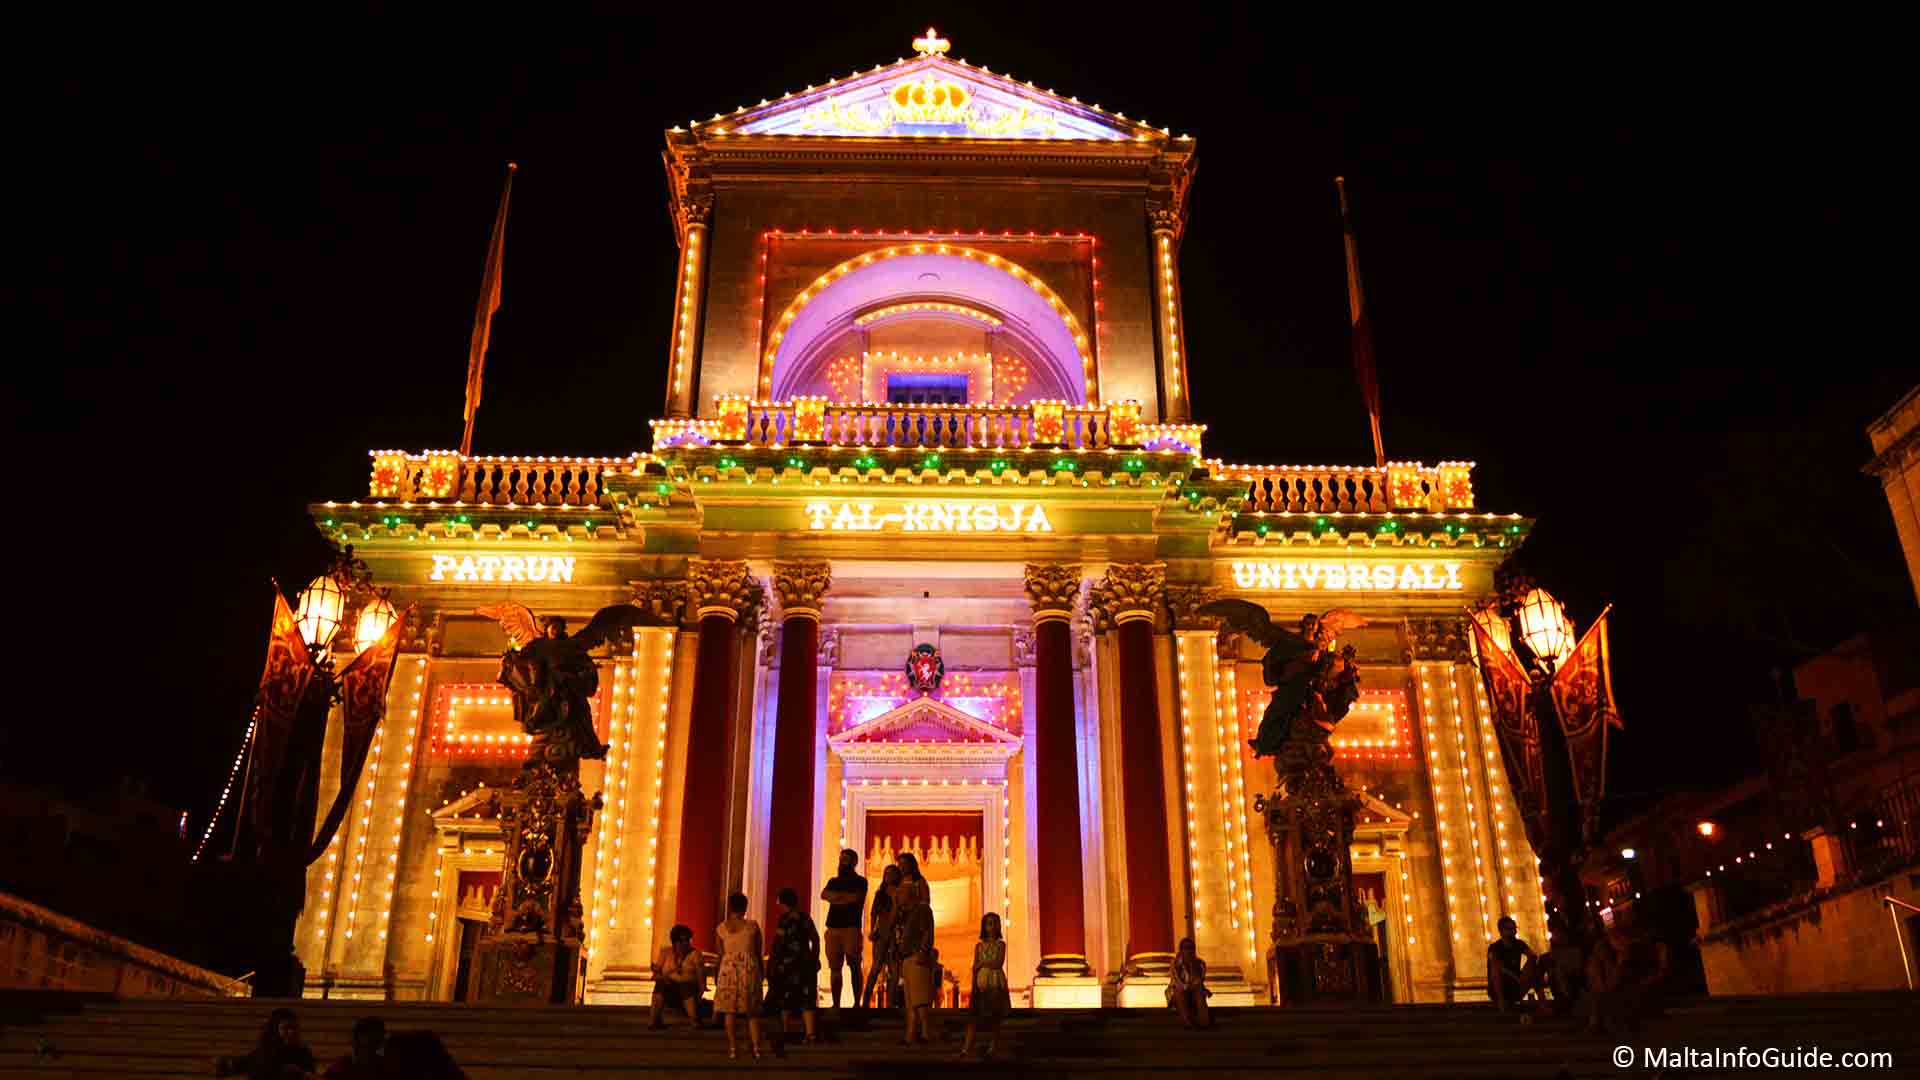 Kalkara Malta church decorated and lit up at night on the night of the feast day